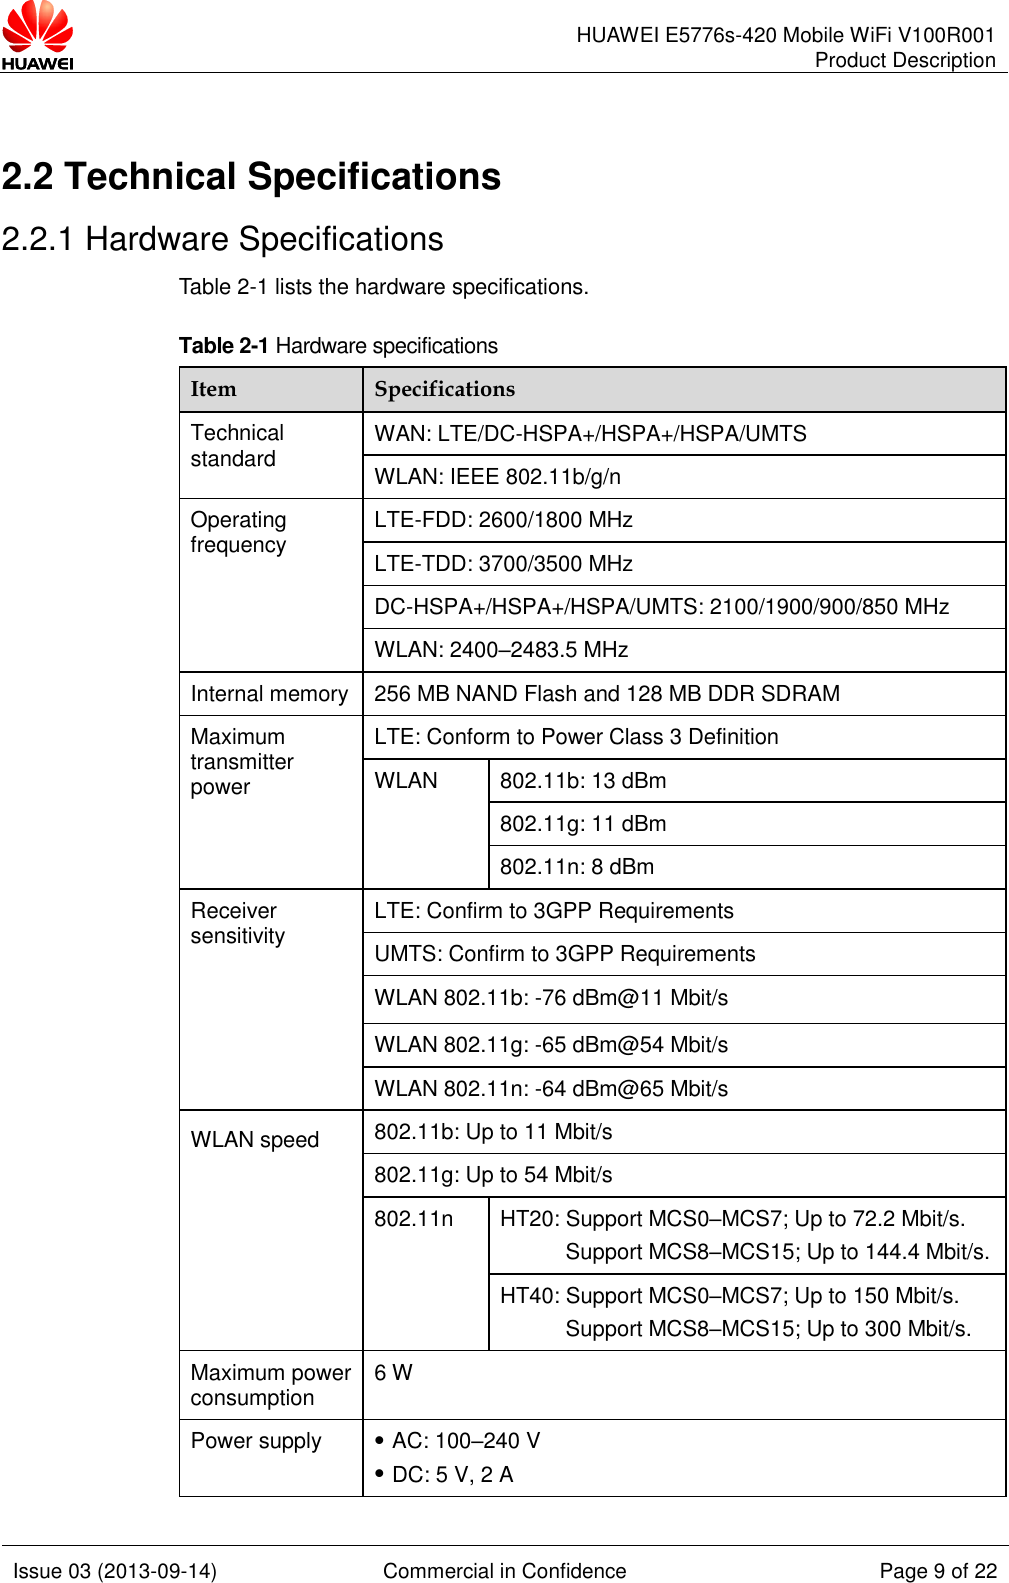      HUAWEI E5776s-420 Mobile WiFi V100R001 Product Description    Issue 03 (2013-09-14) Commercial in Confidence Page 9 of 22  2.2 Technical Specifications 2.2.1 Hardware Specifications Table 2-1 lists the hardware specifications. Table 2-1 Hardware specifications Item Specifications Technical standard WAN: LTE/DC-HSPA+/HSPA+/HSPA/UMTS WLAN: IEEE 802.11b/g/n Operating frequency LTE-FDD: 2600/1800 MHz LTE-TDD: 3700/3500 MHz DC-HSPA+/HSPA+/HSPA/UMTS: 2100/1900/900/850 MHz WLAN: 2400–2483.5 MHz Internal memory 256 MB NAND Flash and 128 MB DDR SDRAM Maximum transmitter power LTE: Conform to Power Class 3 Definition WLAN 802.11b: 13 dBm 802.11g: 11 dBm 802.11n: 8 dBm Receiver sensitivity LTE: Confirm to 3GPP Requirements UMTS: Confirm to 3GPP Requirements WLAN 802.11b: -76 dBm@11 Mbit/s WLAN 802.11g: -65 dBm@54 Mbit/s   WLAN 802.11n: -64 dBm@65 Mbit/s WLAN speed 802.11b: Up to 11 Mbit/s 802.11g: Up to 54 Mbit/s 802.11n HT20: Support MCS0–MCS7; Up to 72.2 Mbit/s.             Support MCS8–MCS15; Up to 144.4 Mbit/s. HT40: Support MCS0–MCS7; Up to 150 Mbit/s.             Support MCS8–MCS15; Up to 300 Mbit/s. Maximum power consumption 6 W Power supply  AC: 100–240 V  DC: 5 V, 2 A 